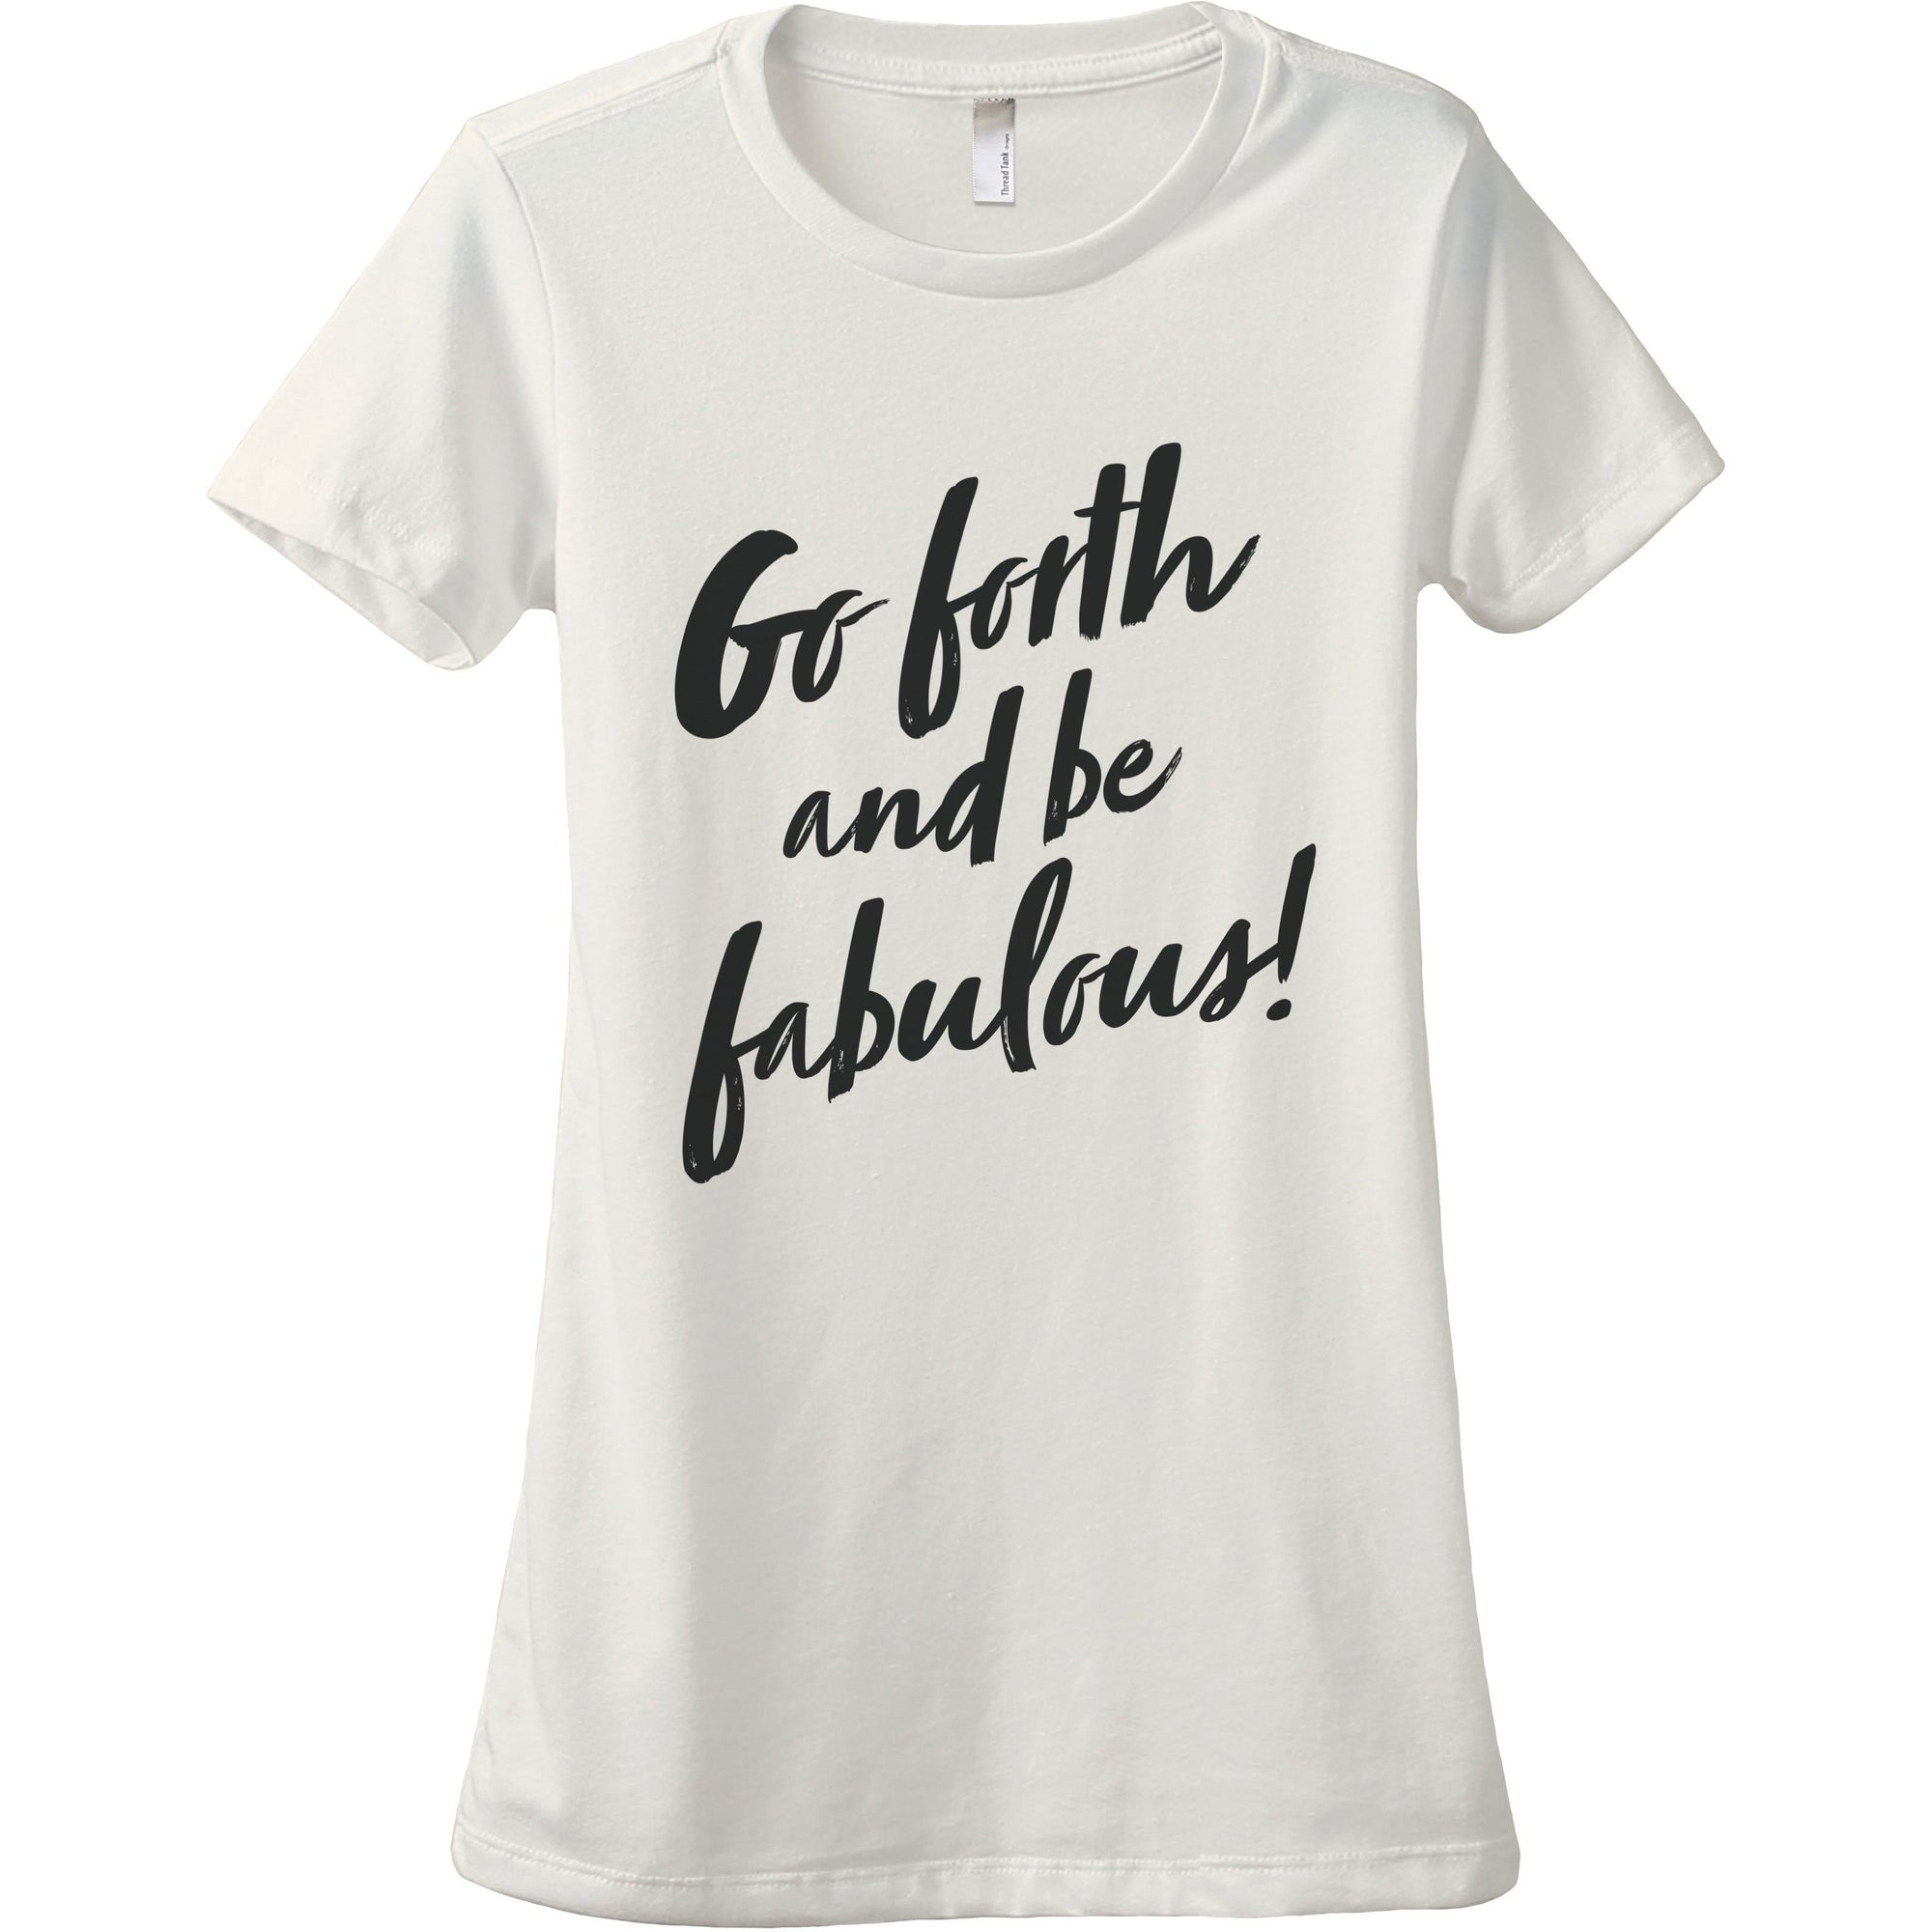 Go Fourth And Be Fabulous - Stories You Can Wear